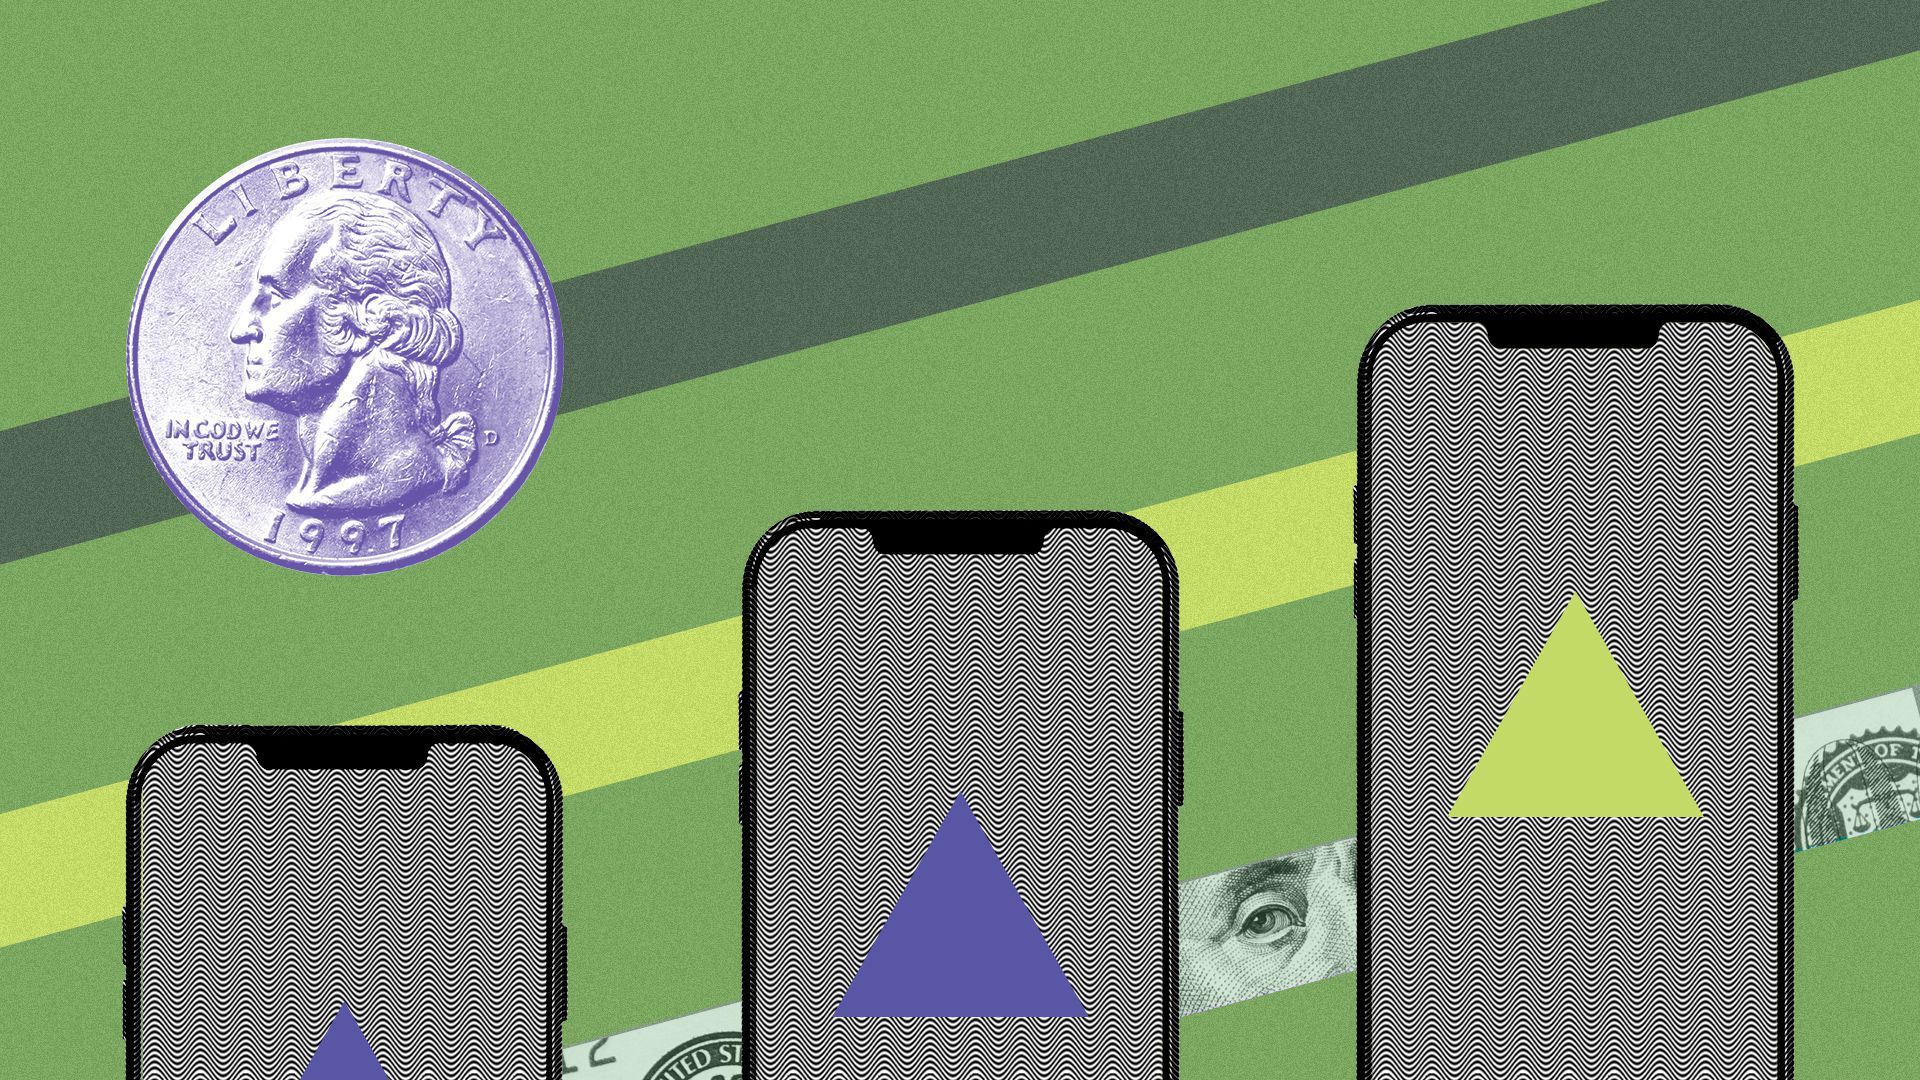 Illustration of a coin and some smartphones.